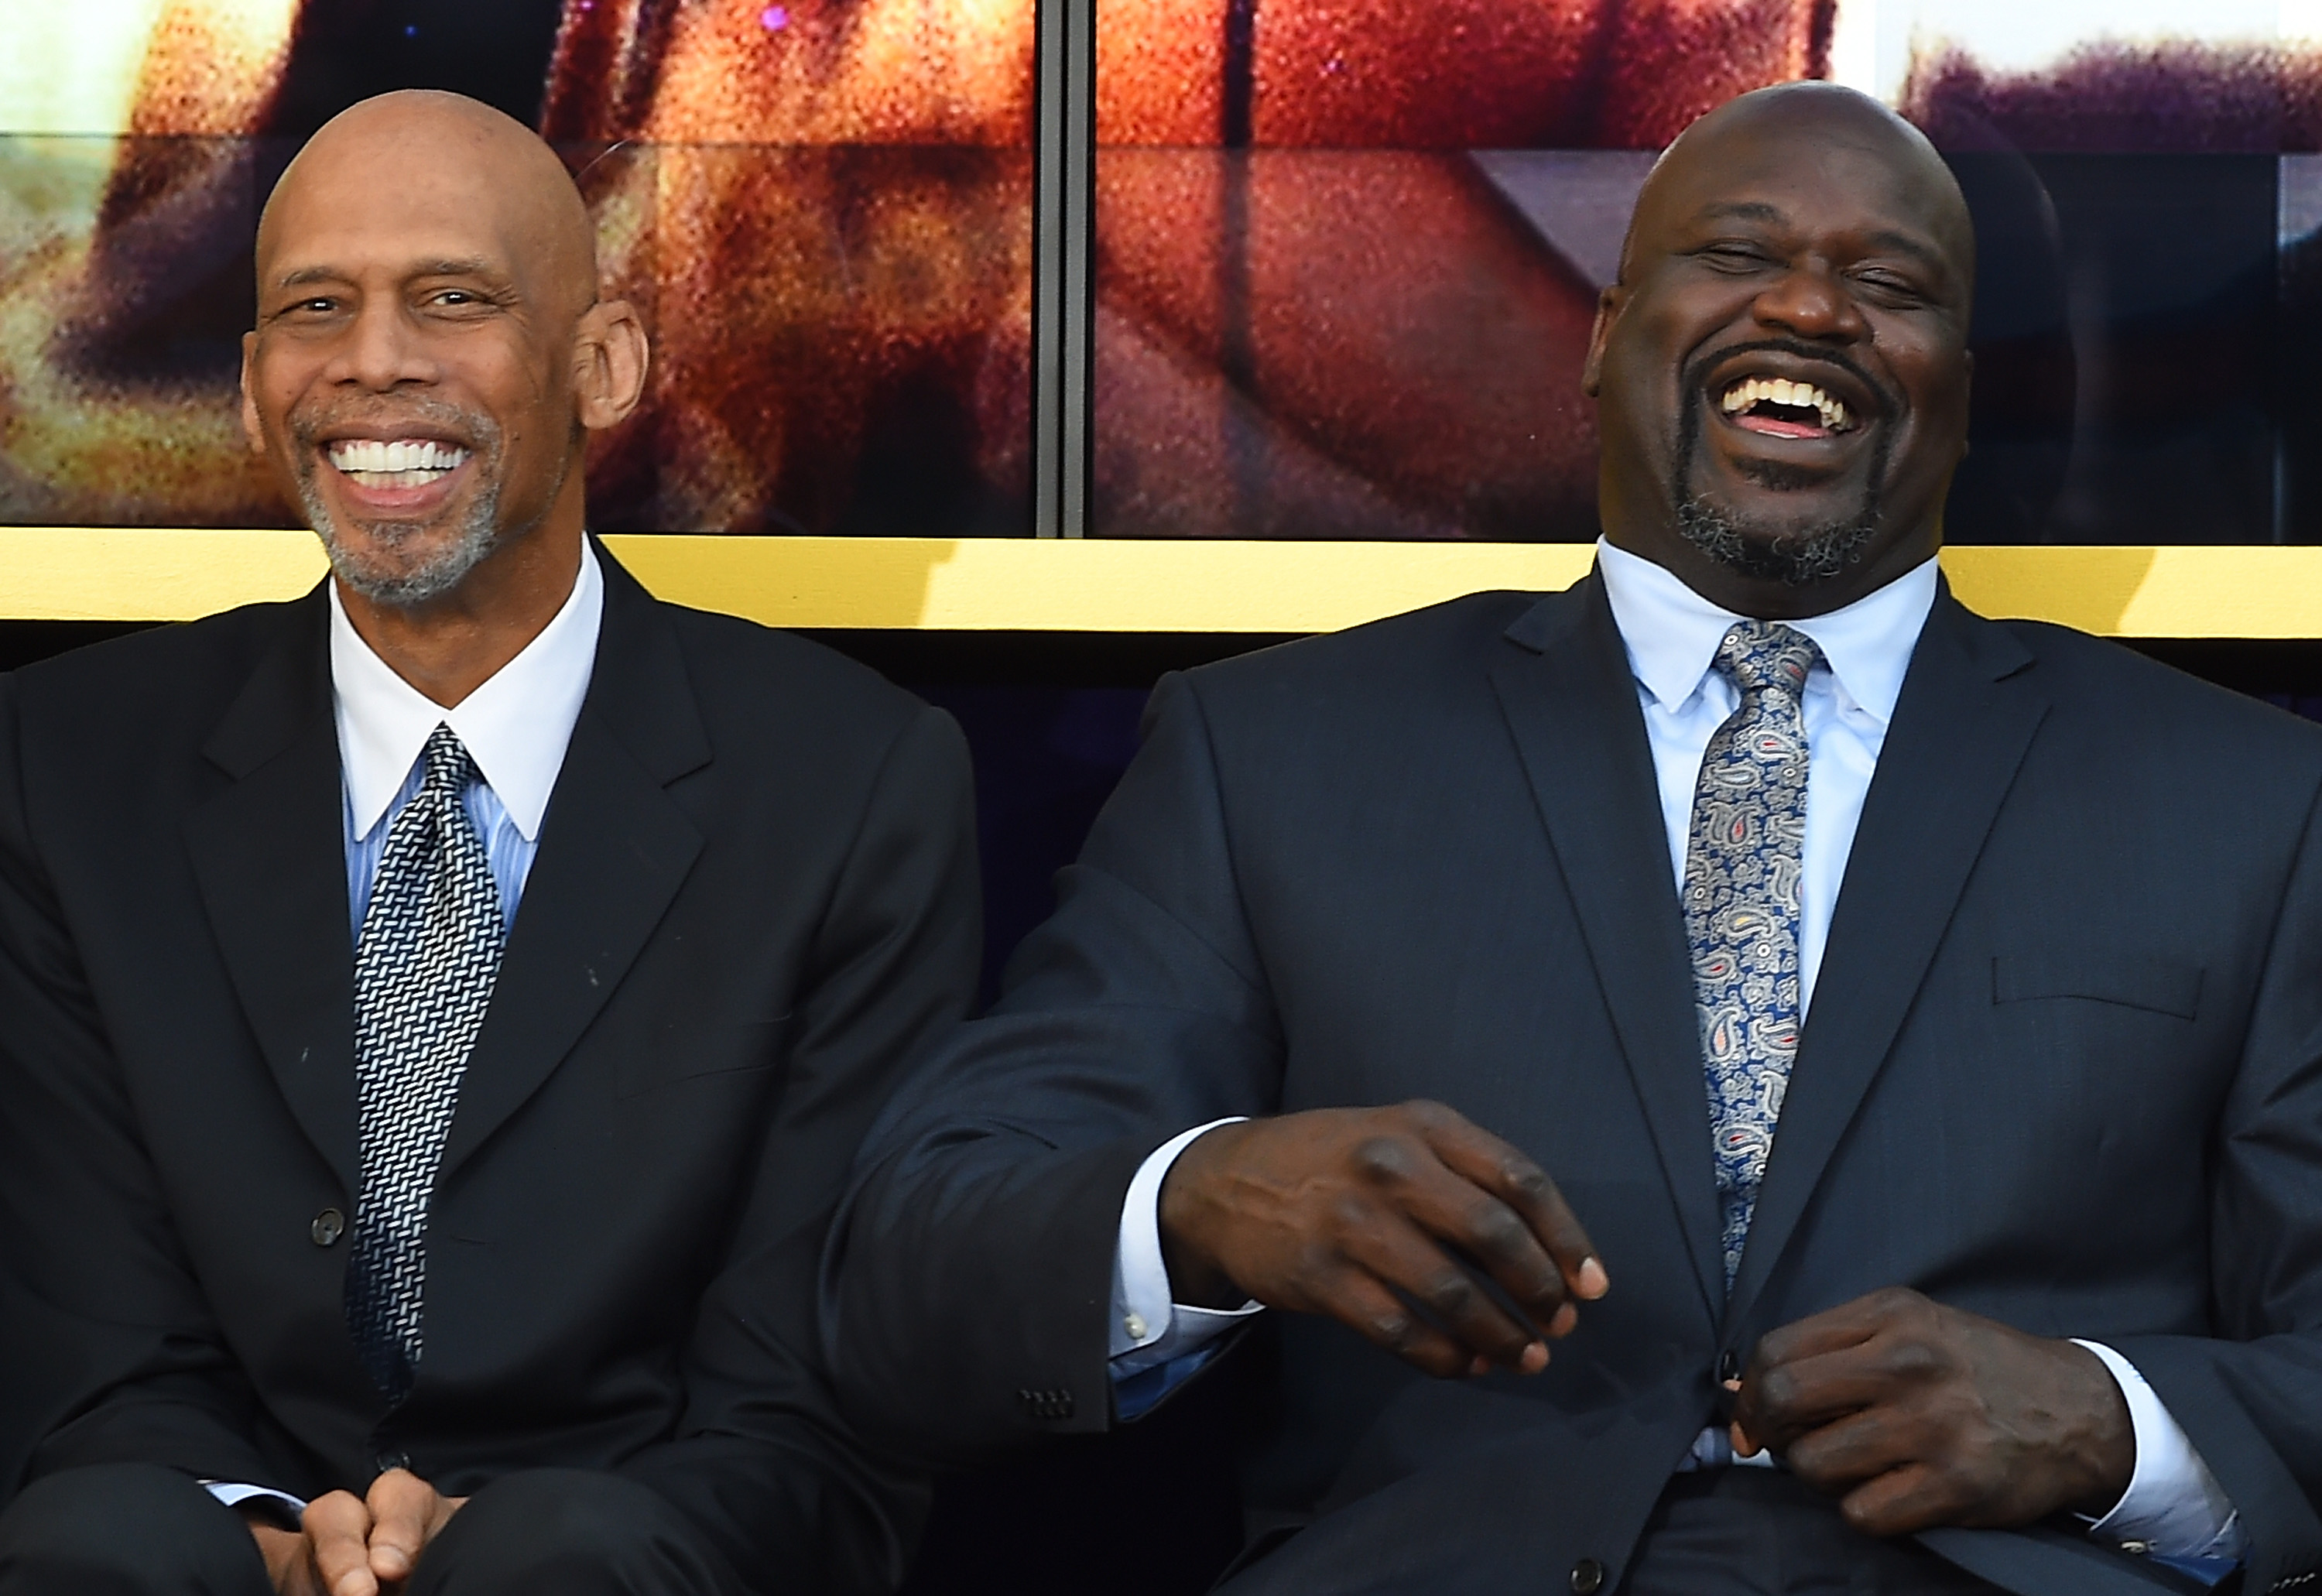 Shaquille O'Neal had some harsh words for today's young players.